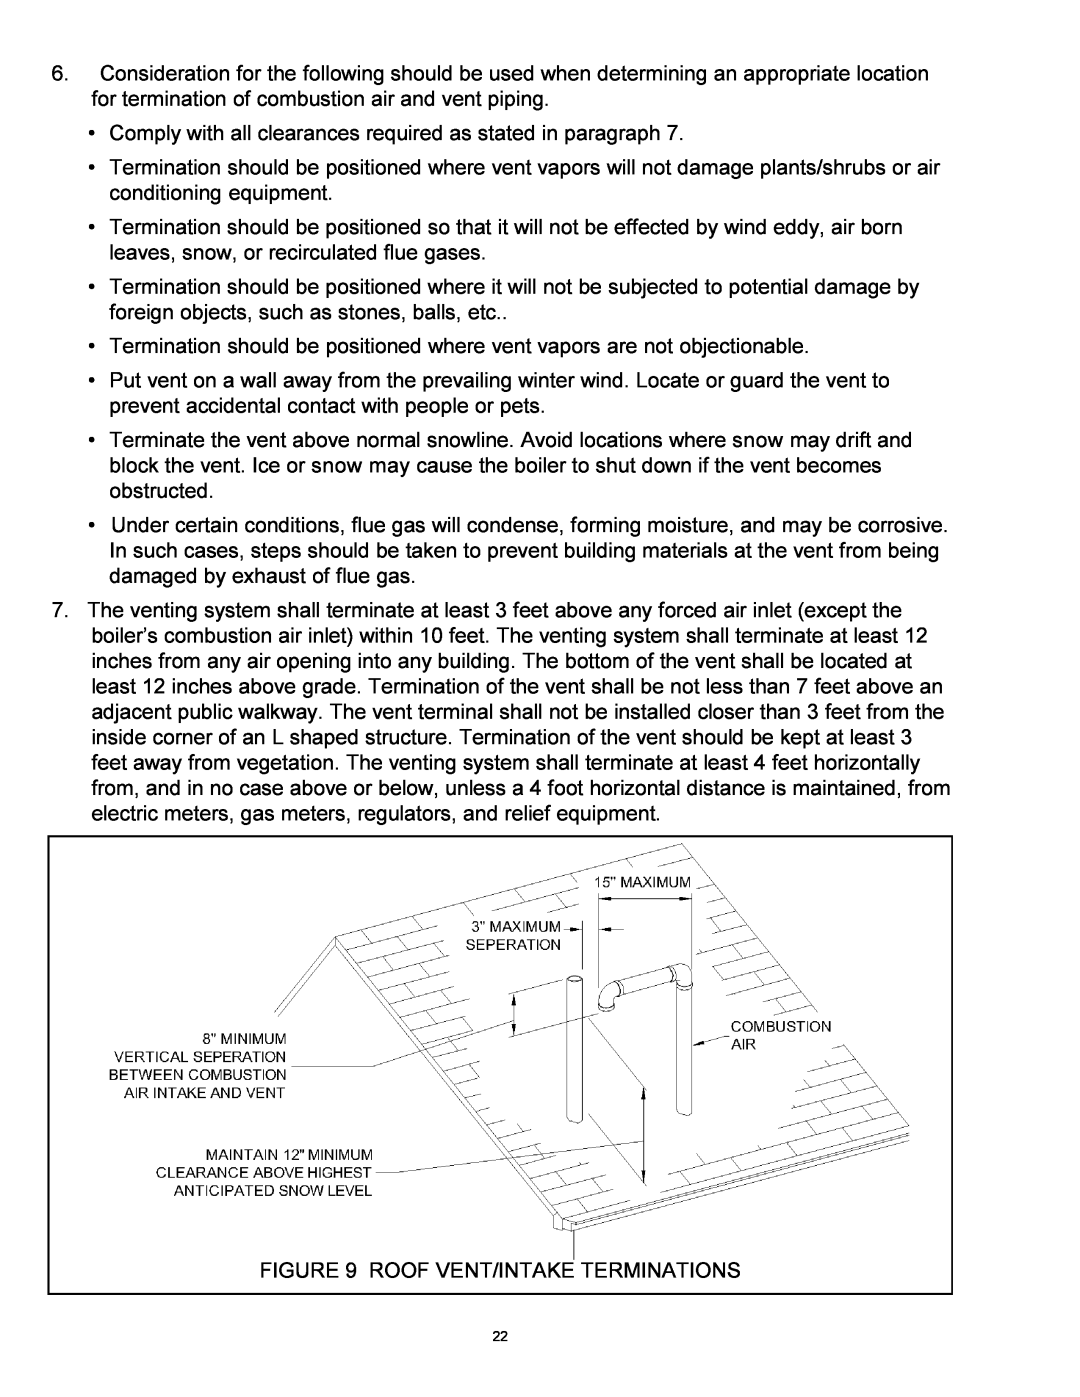 Quantum GAS-FIRED BOILERS installation instructions Roof Vent/Intake Terminations 